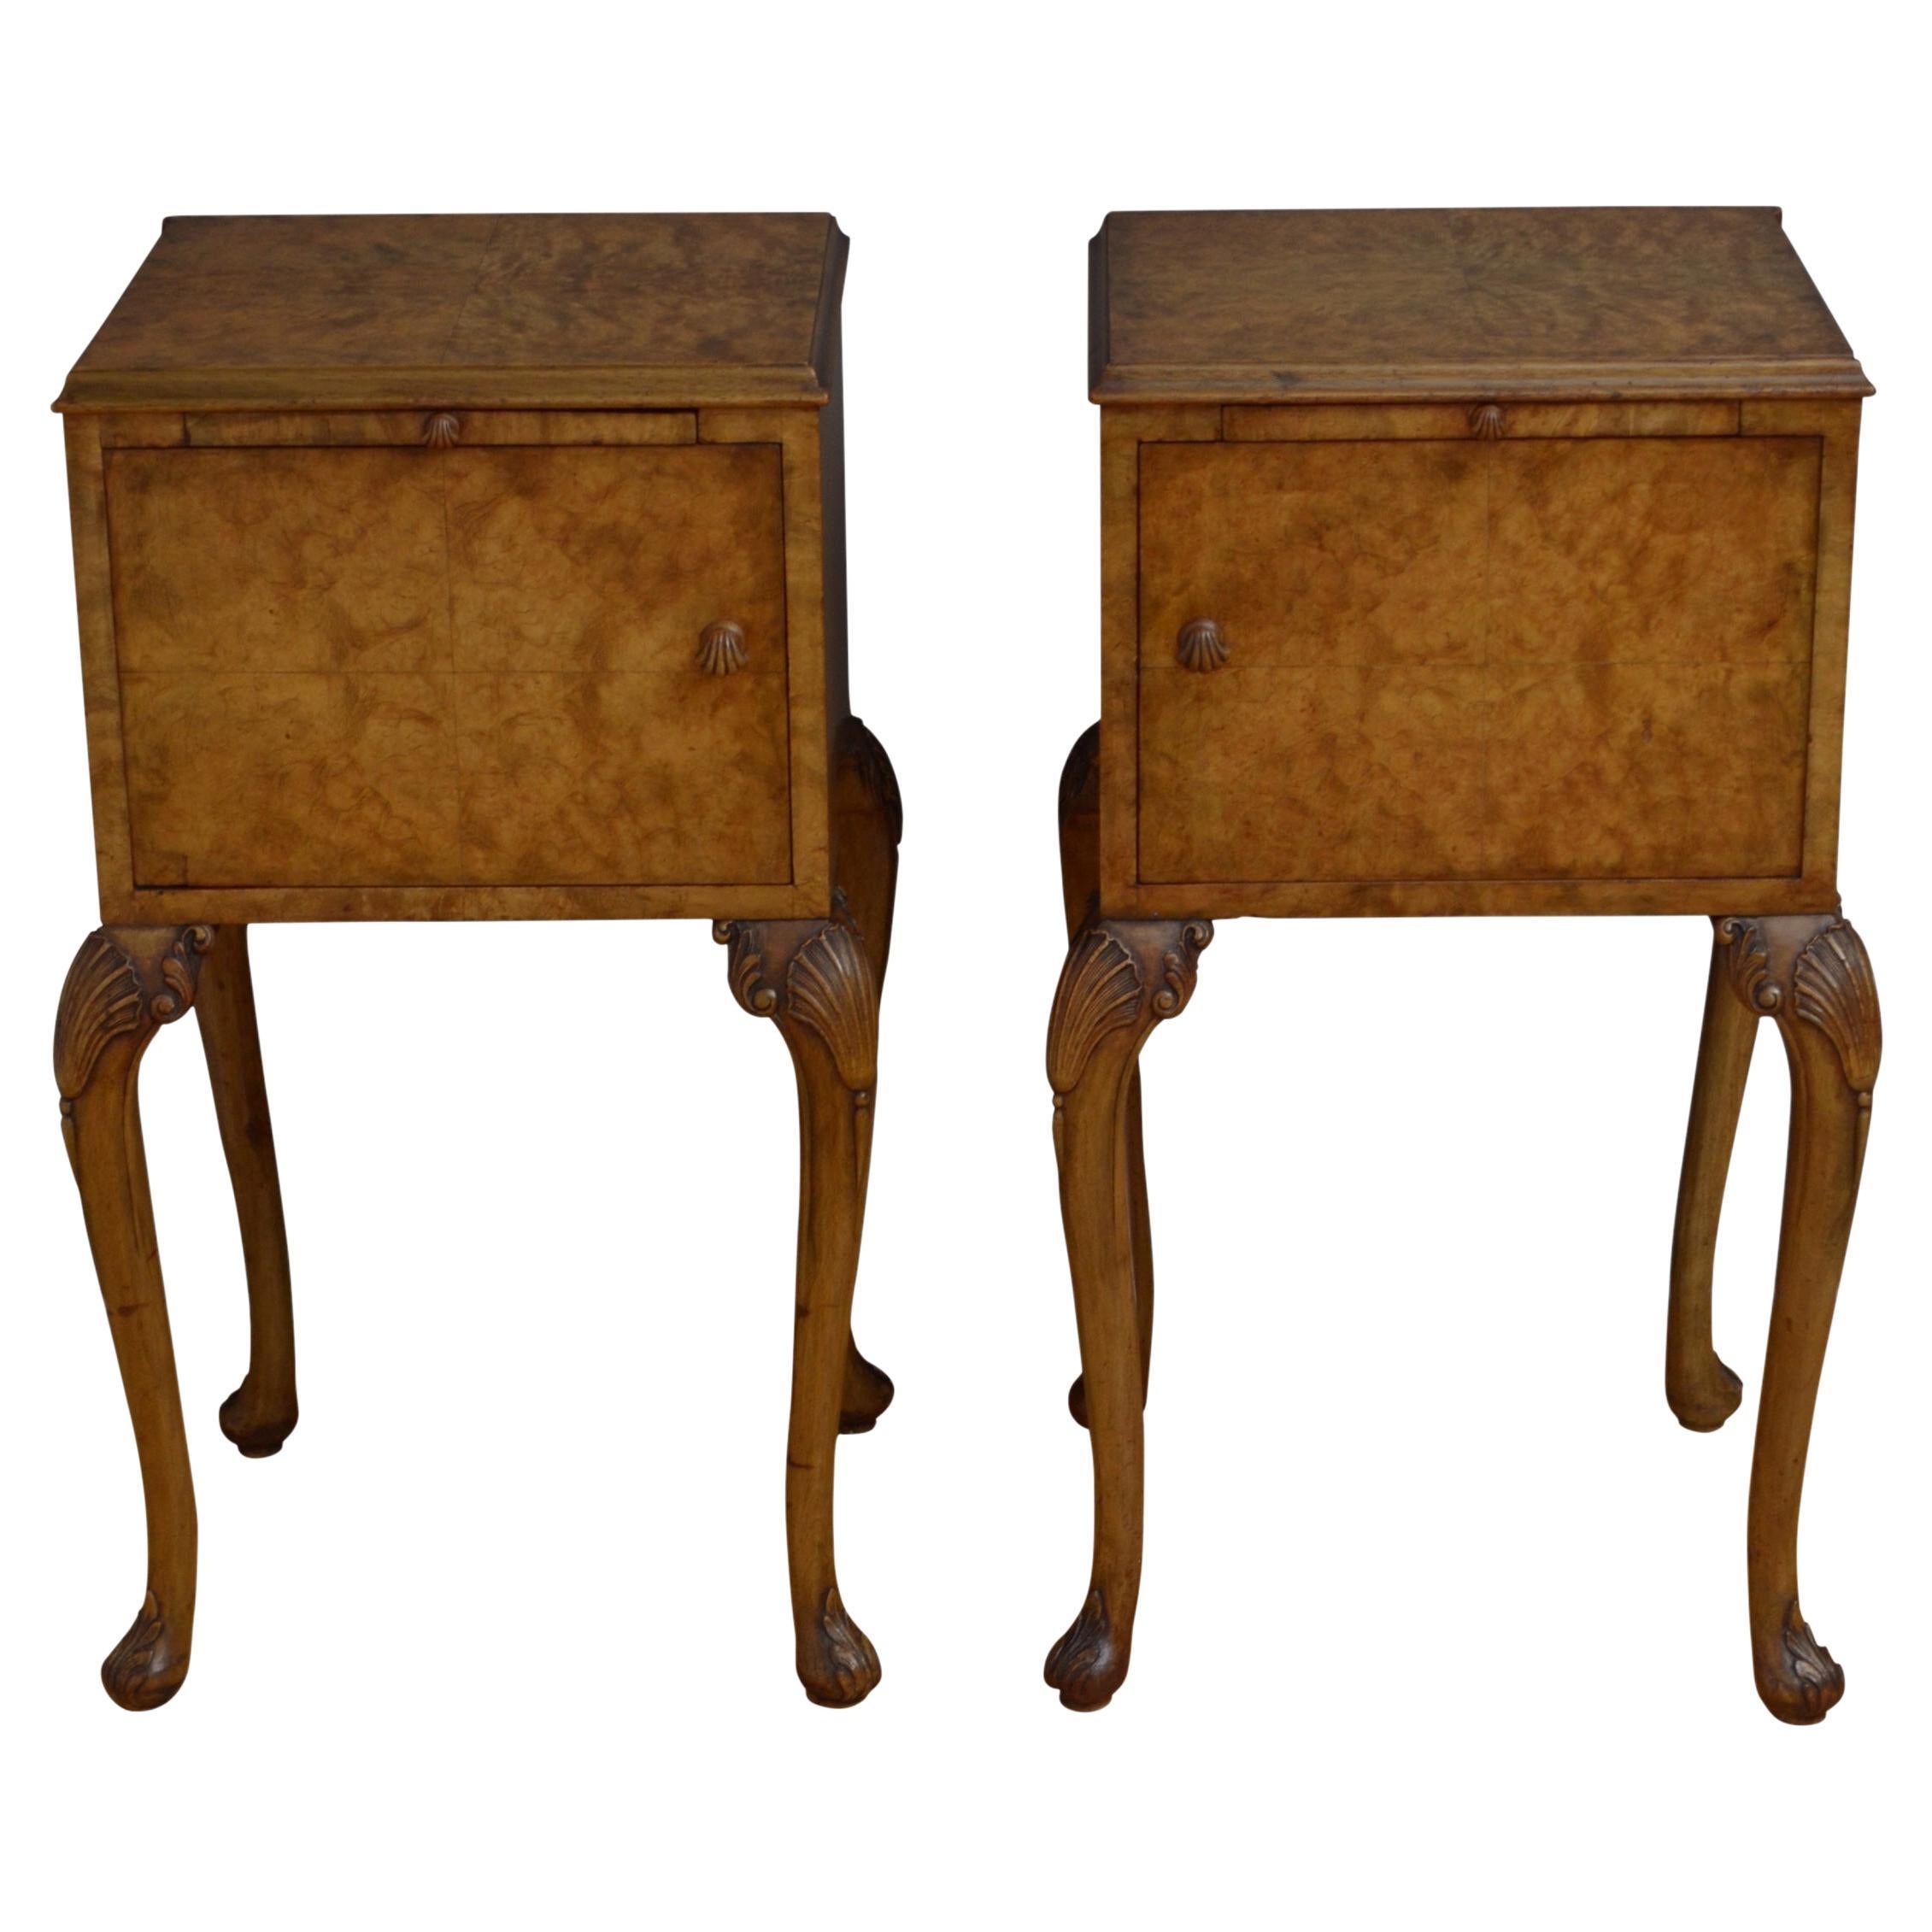 Queen Anne Style Bedside Cabinets